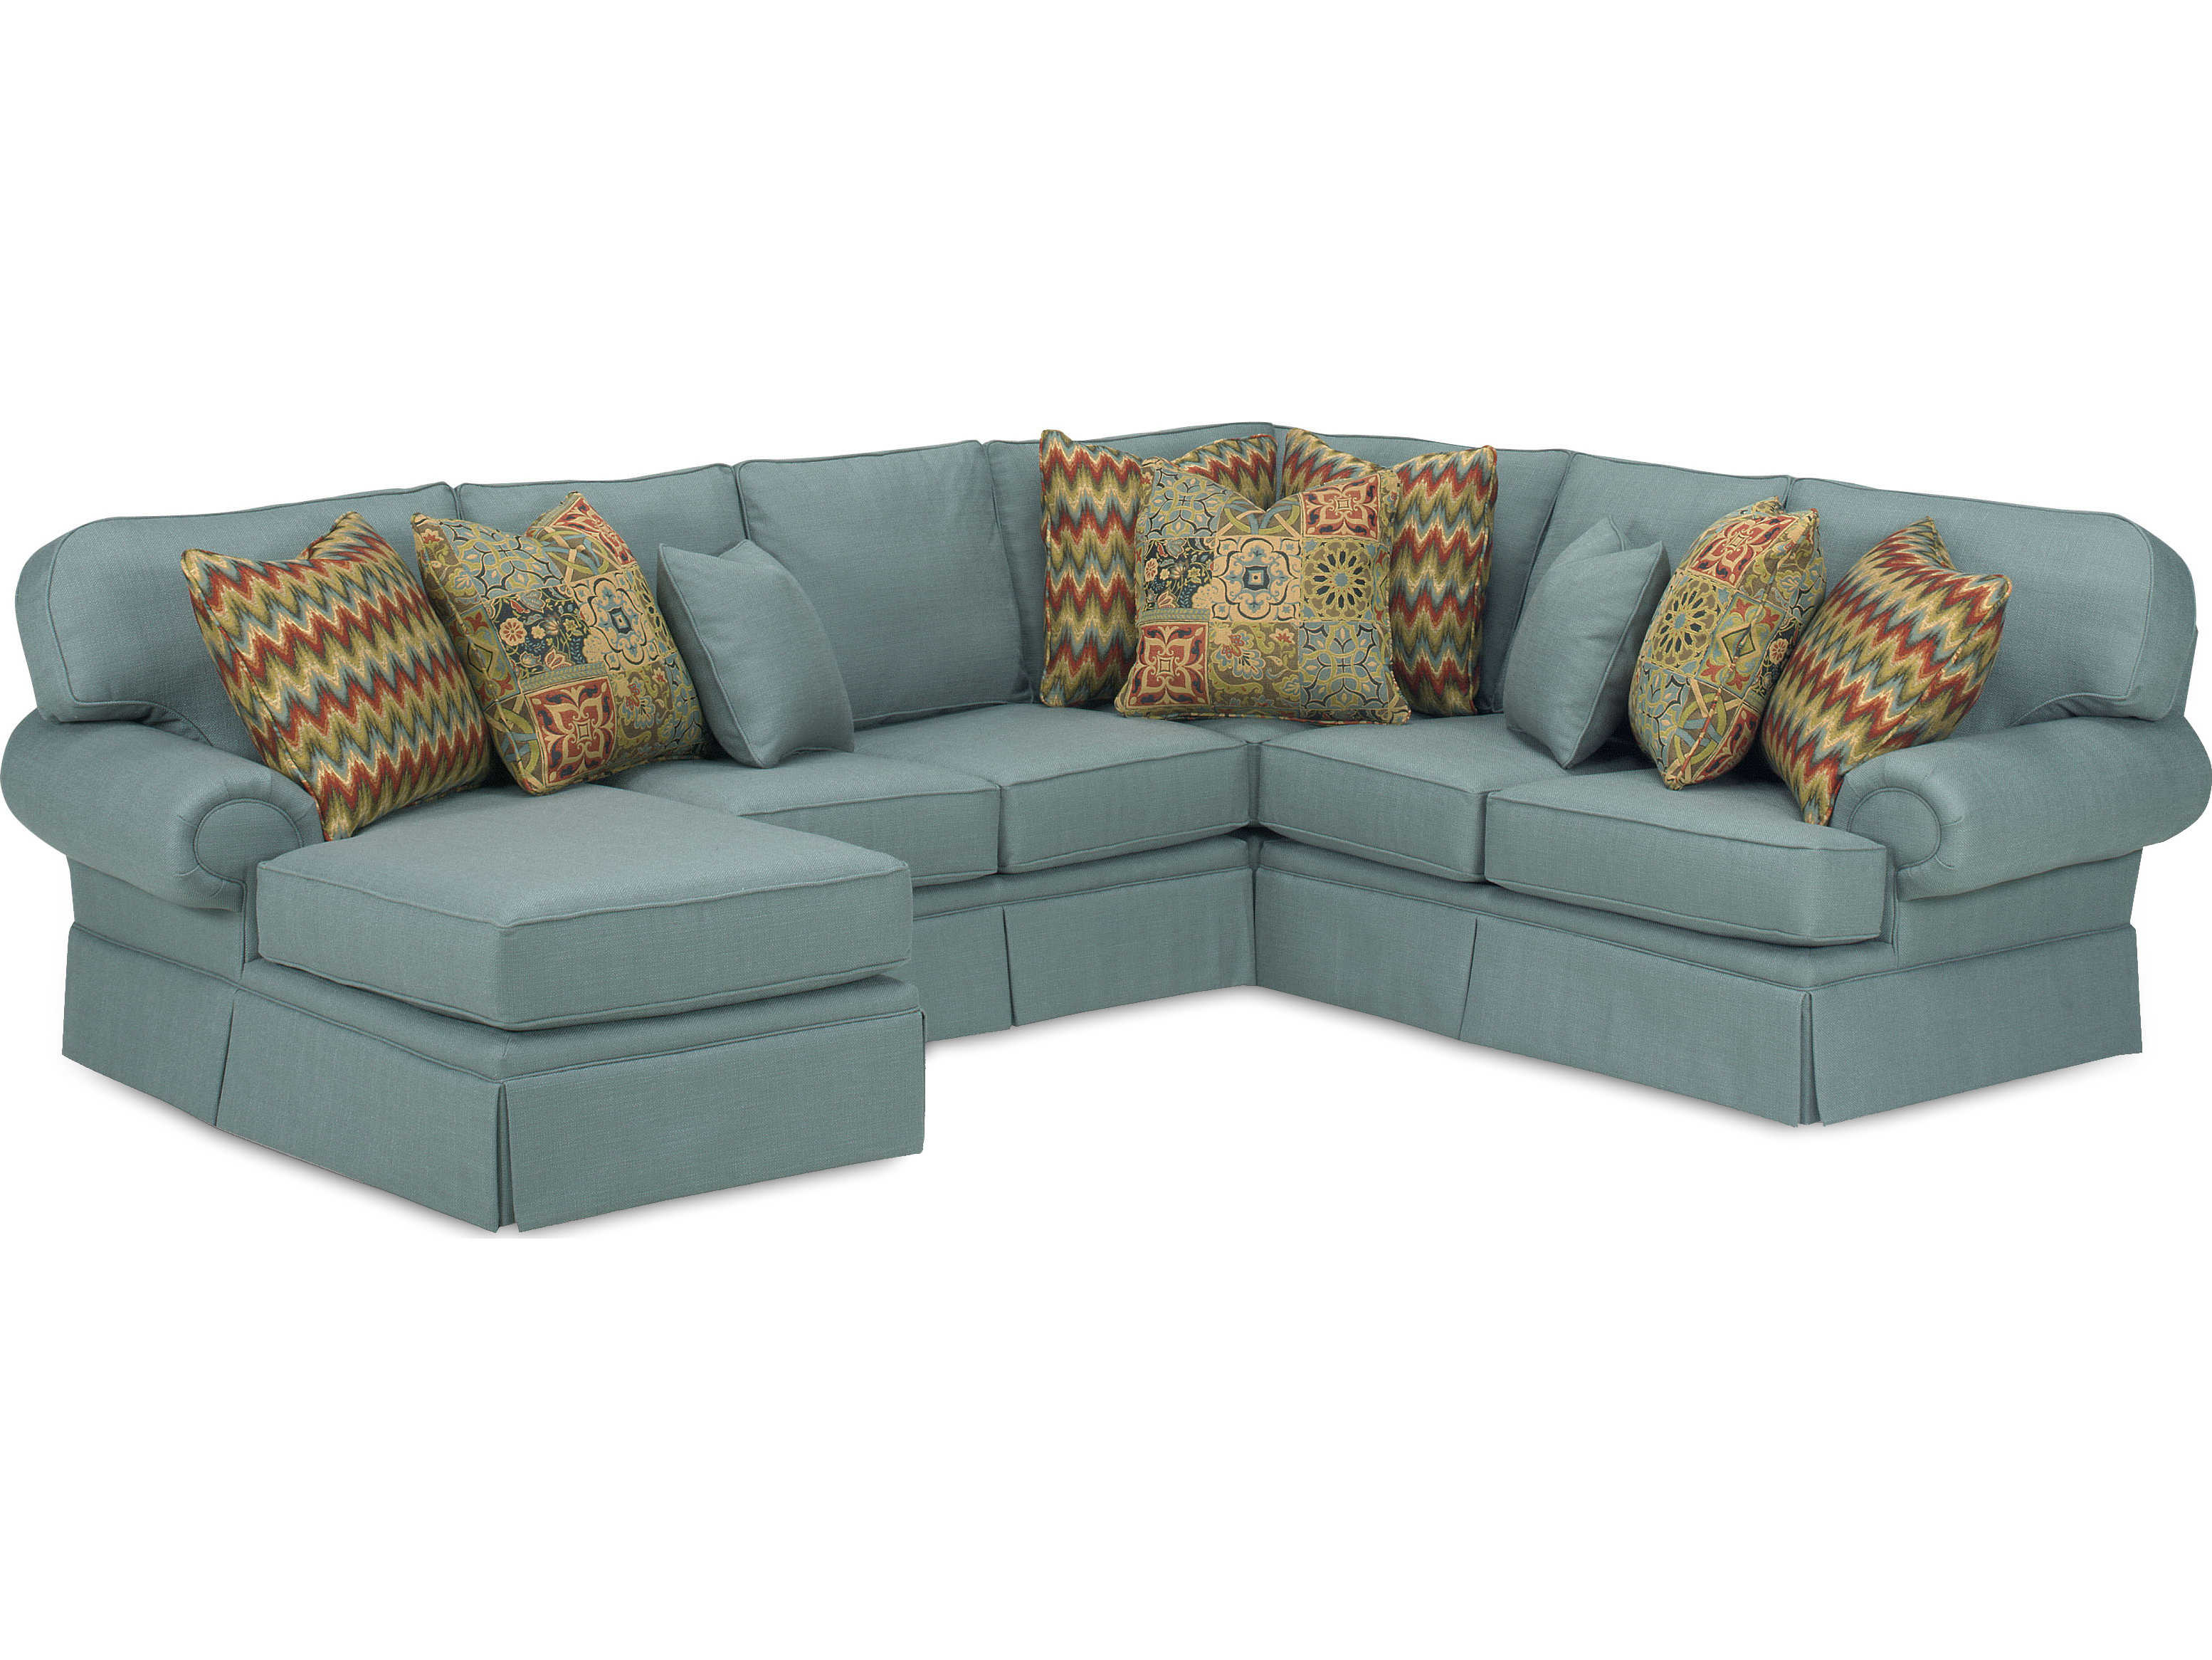 Temple Furniture Comfy Sectional Sofa Tmf9100sectional